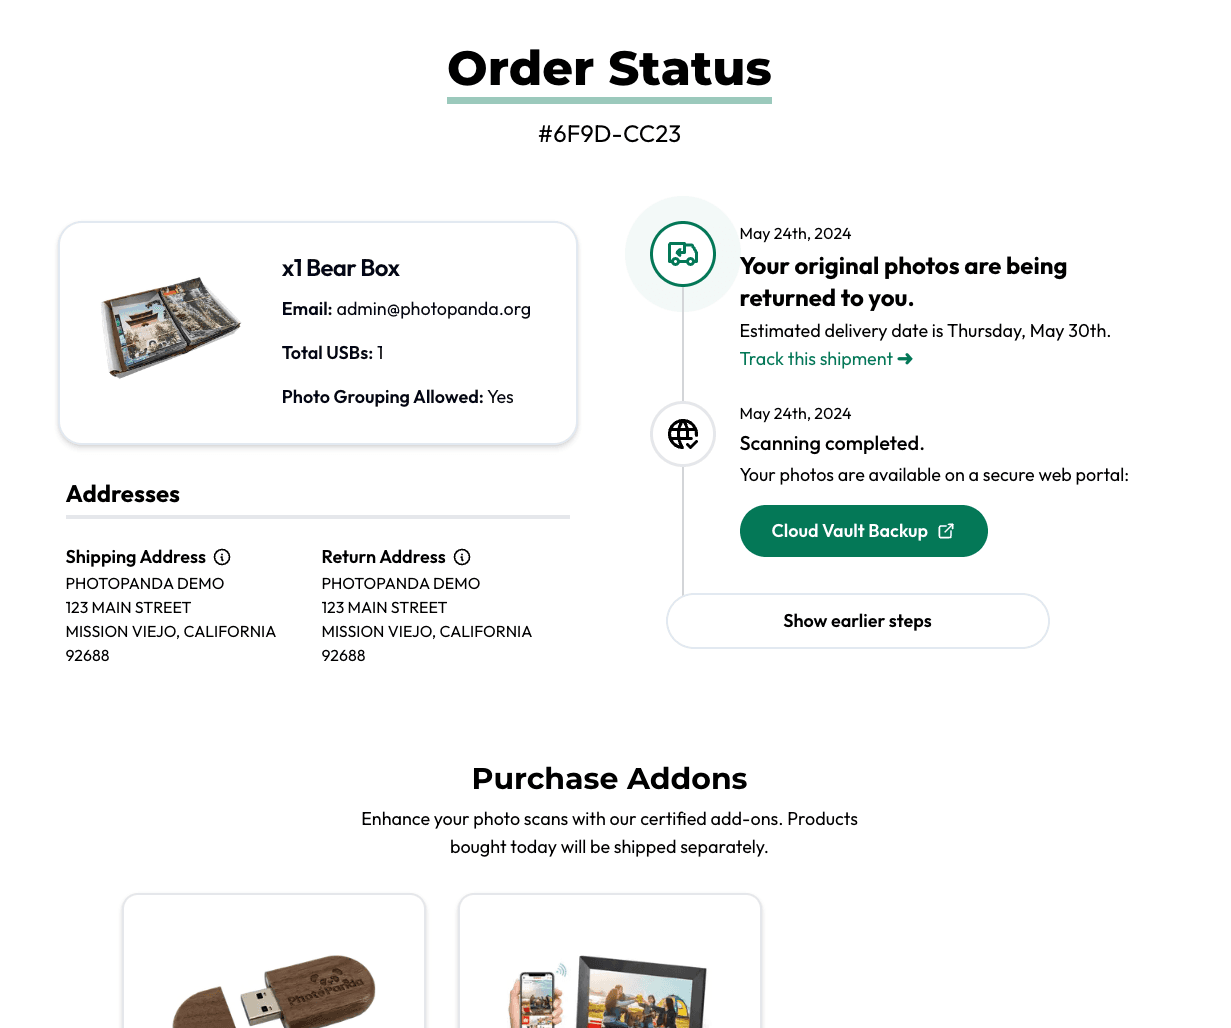 Easy Order Tracking and Management